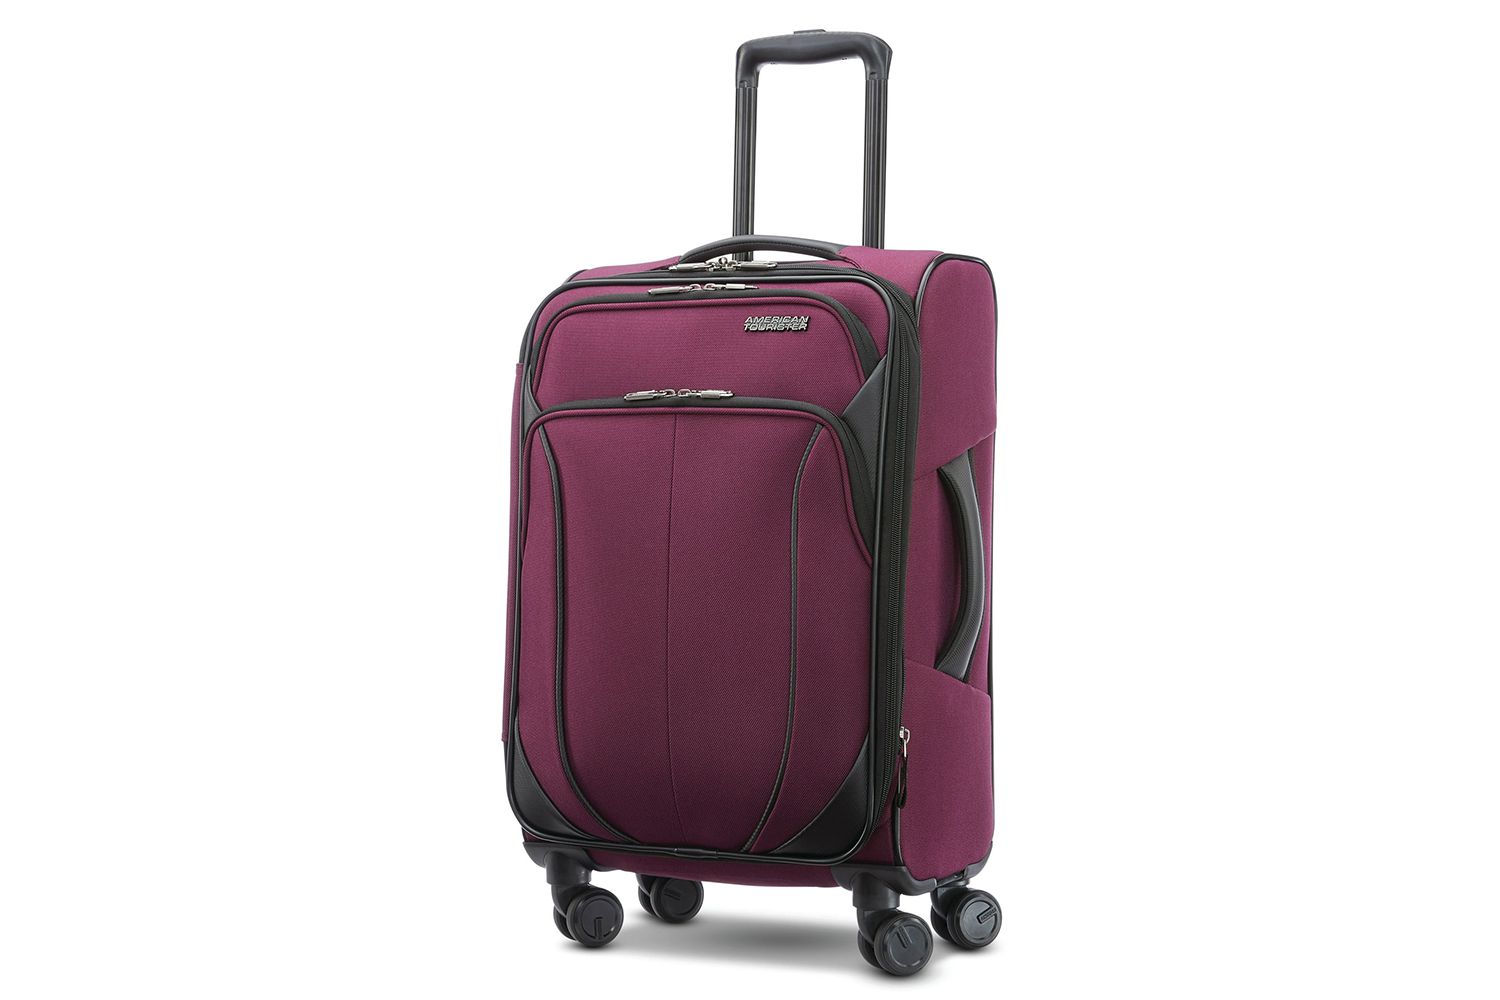 American Tourister 4 KIX 2.0 20" Carry-on Spinner Luggage